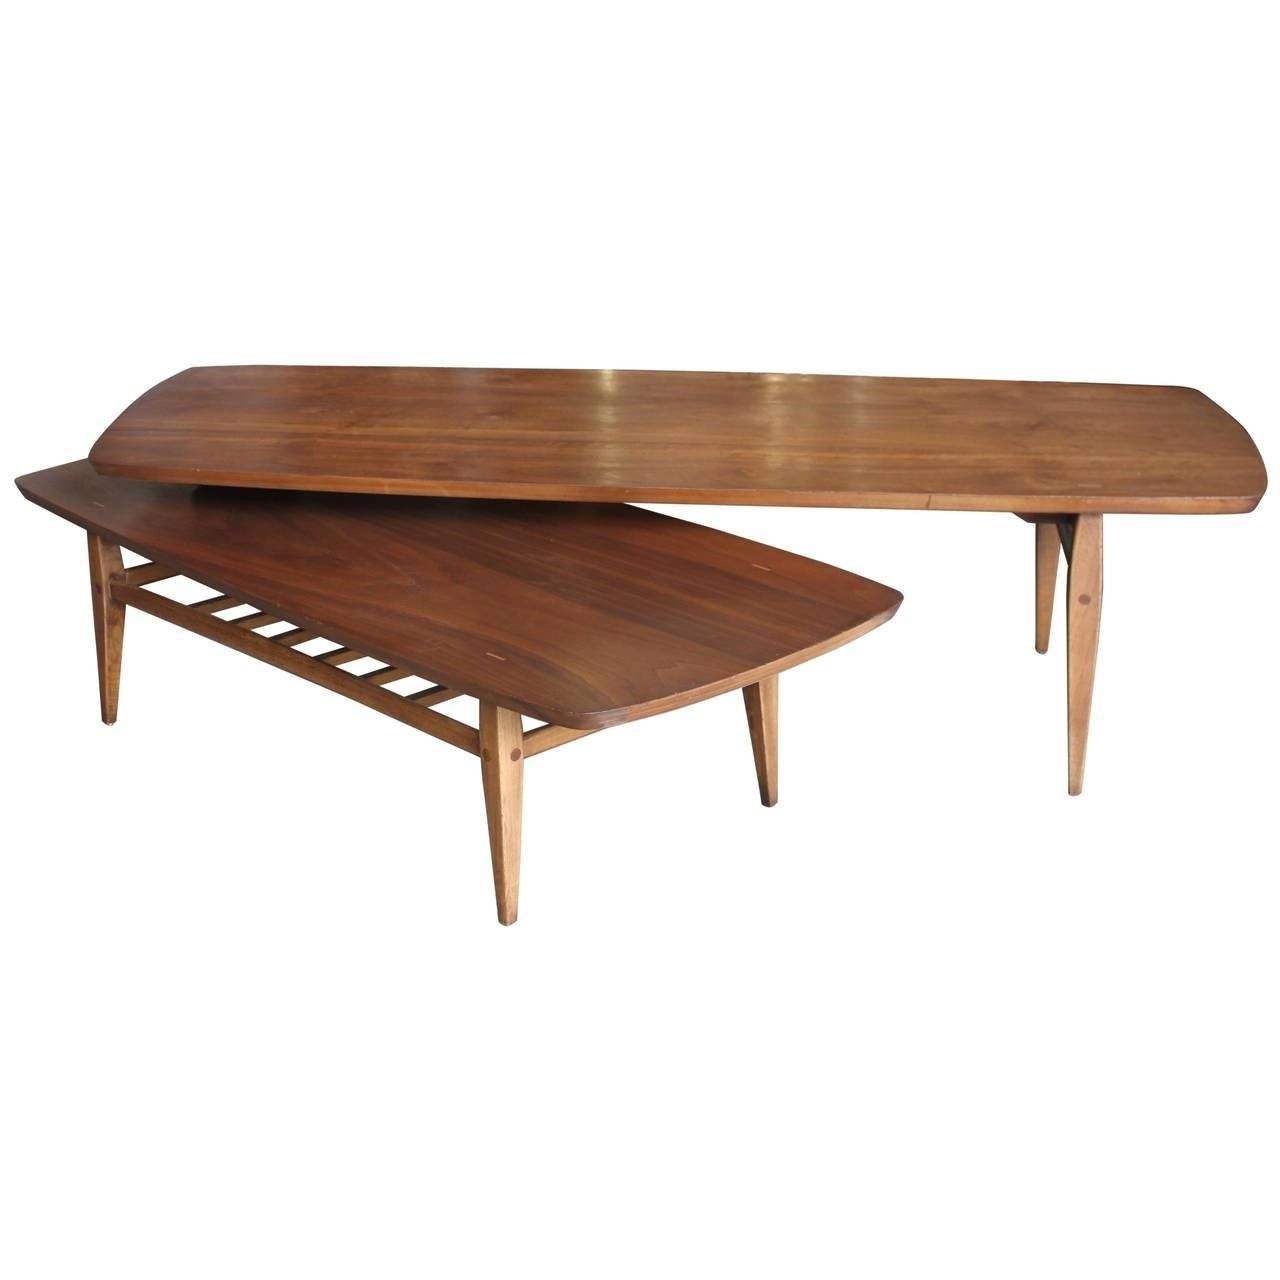 Two Tier Swivel Joint Coffee Tablelane At 1stdibs Throughout Swivel Coffee Tables (View 19 of 30)